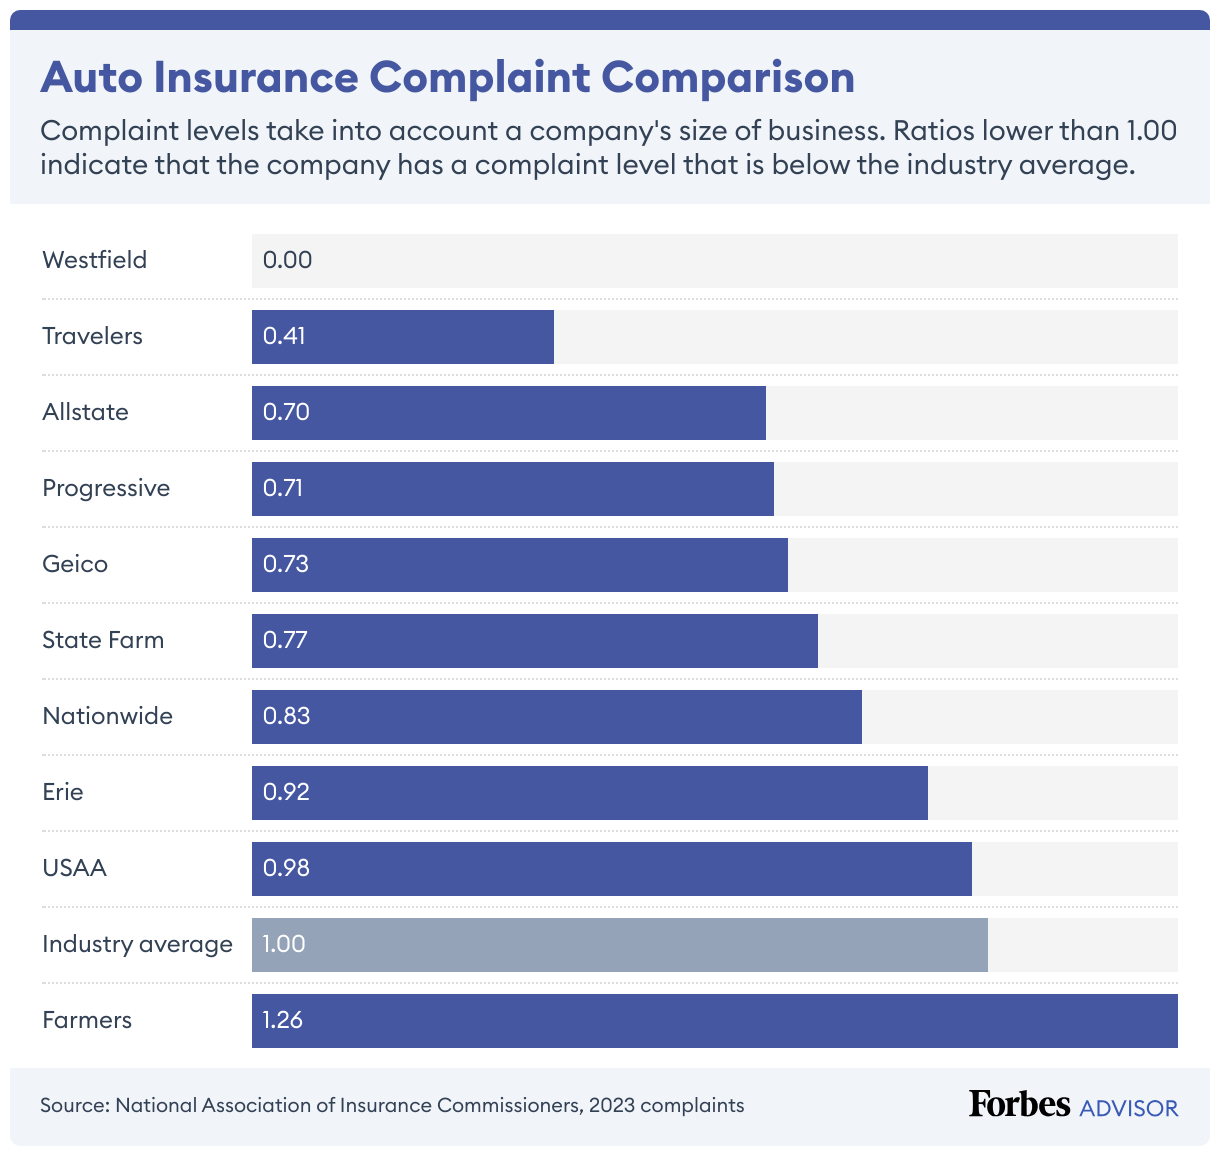 Westfield has a low level of auto insurance complaints compared to Farmers, Geico and USAA.